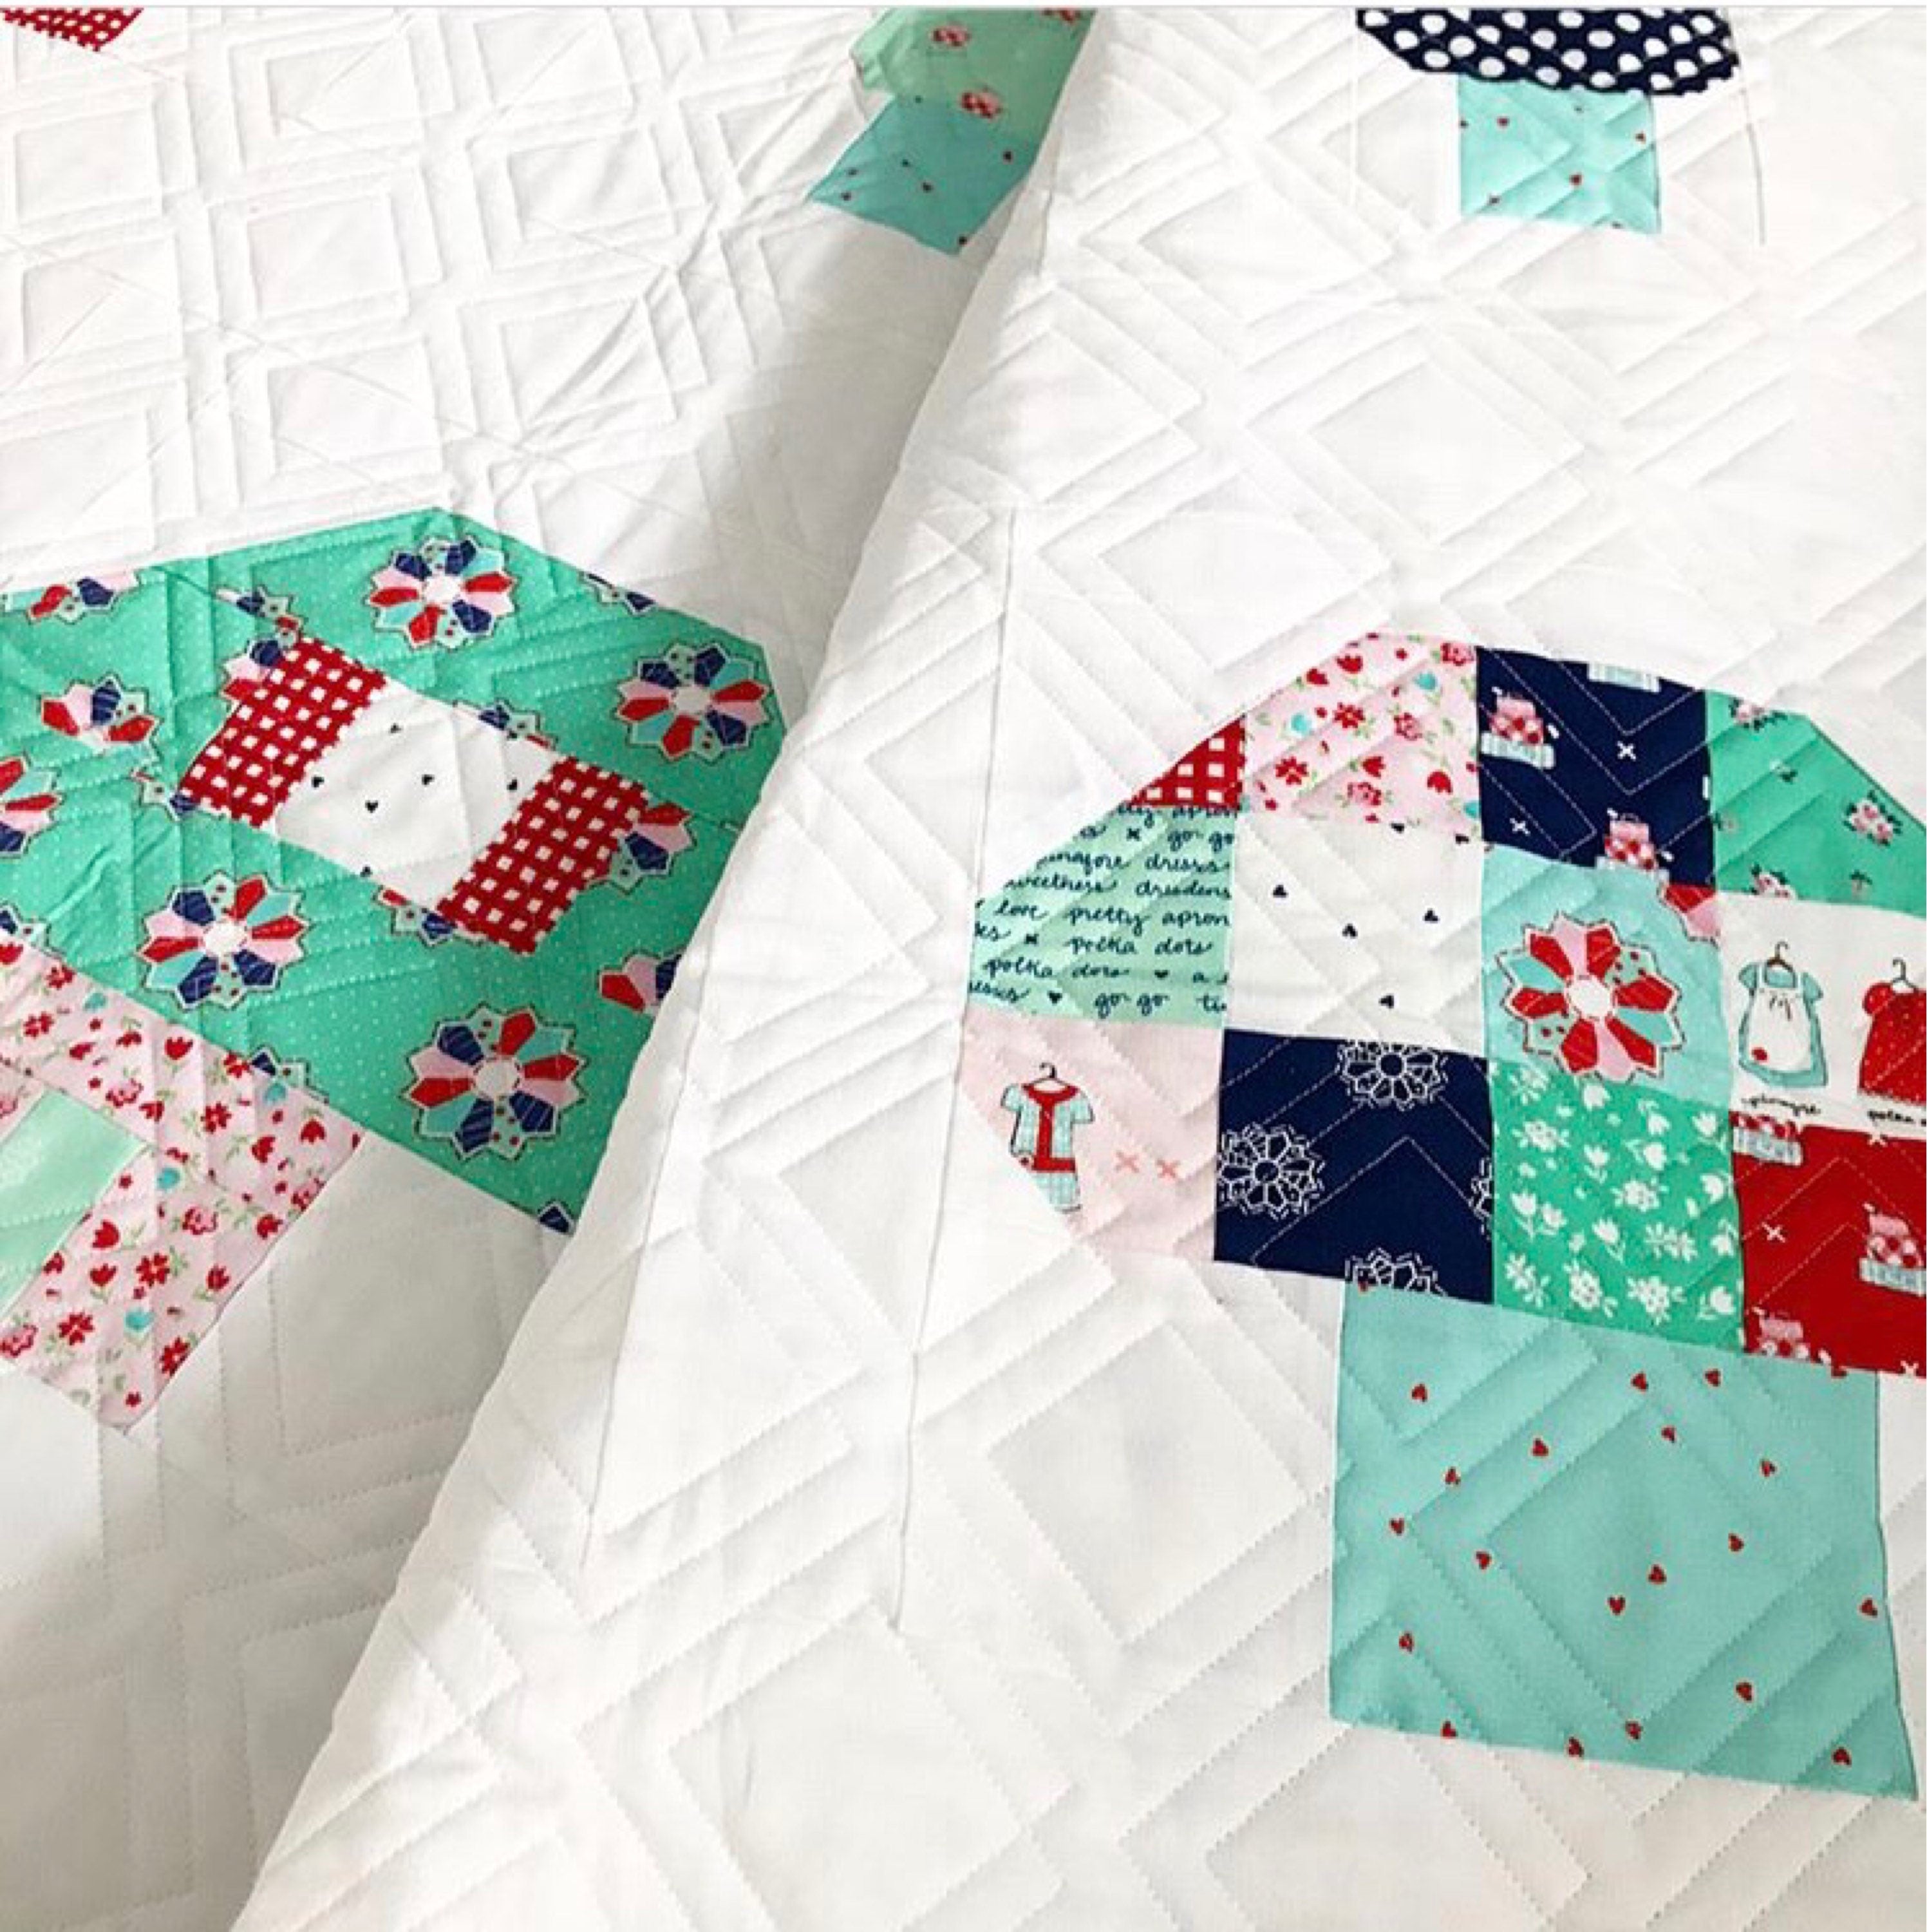 A Nice Place to Live Quilt Pattern - PAPER